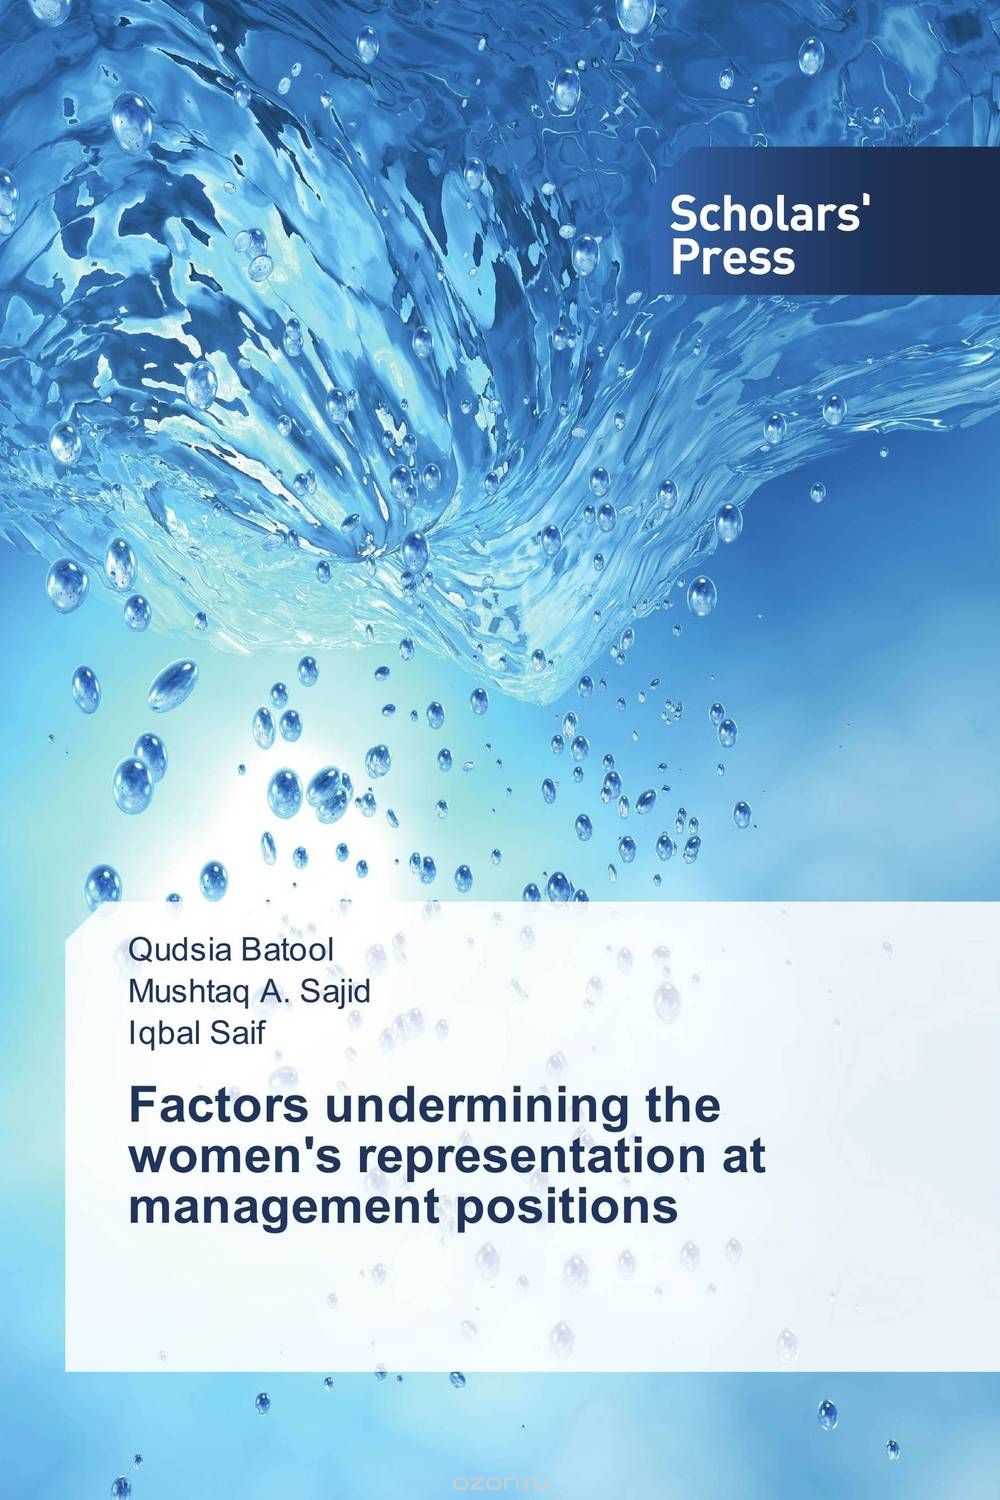 Factors undermining the women's representation at management positions